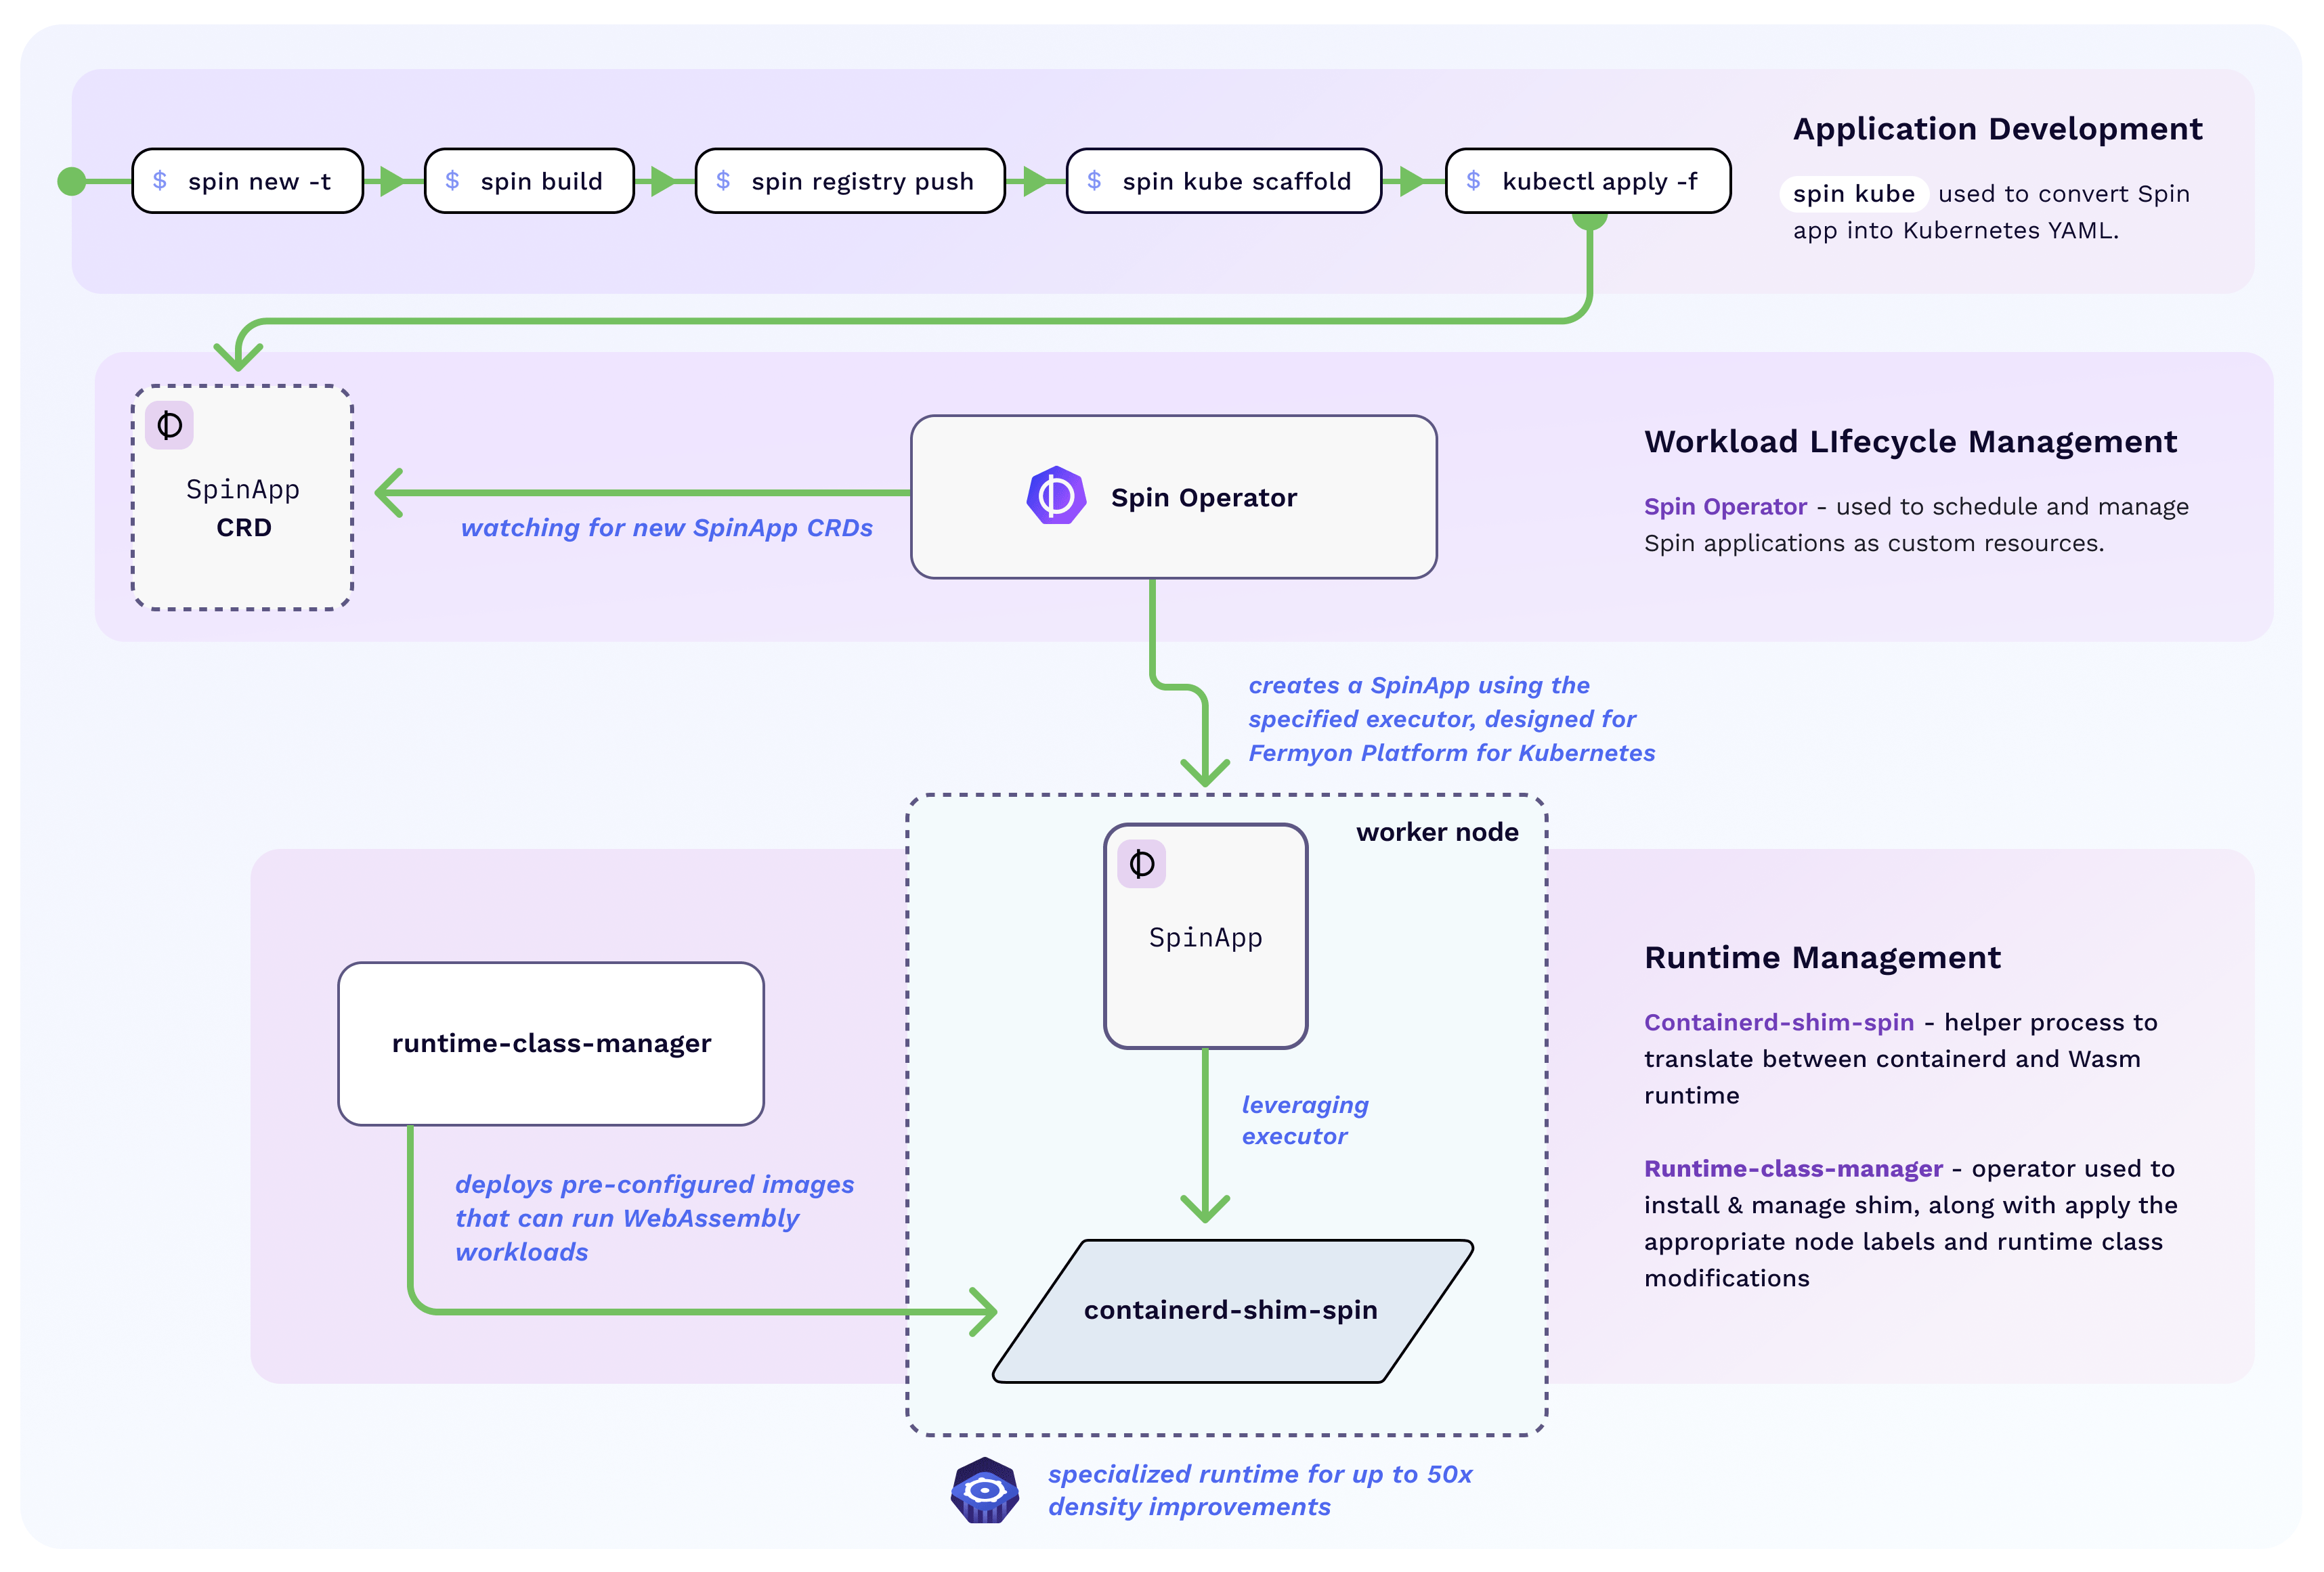 Architecture overview for Fermyon Platform for Kubernetes